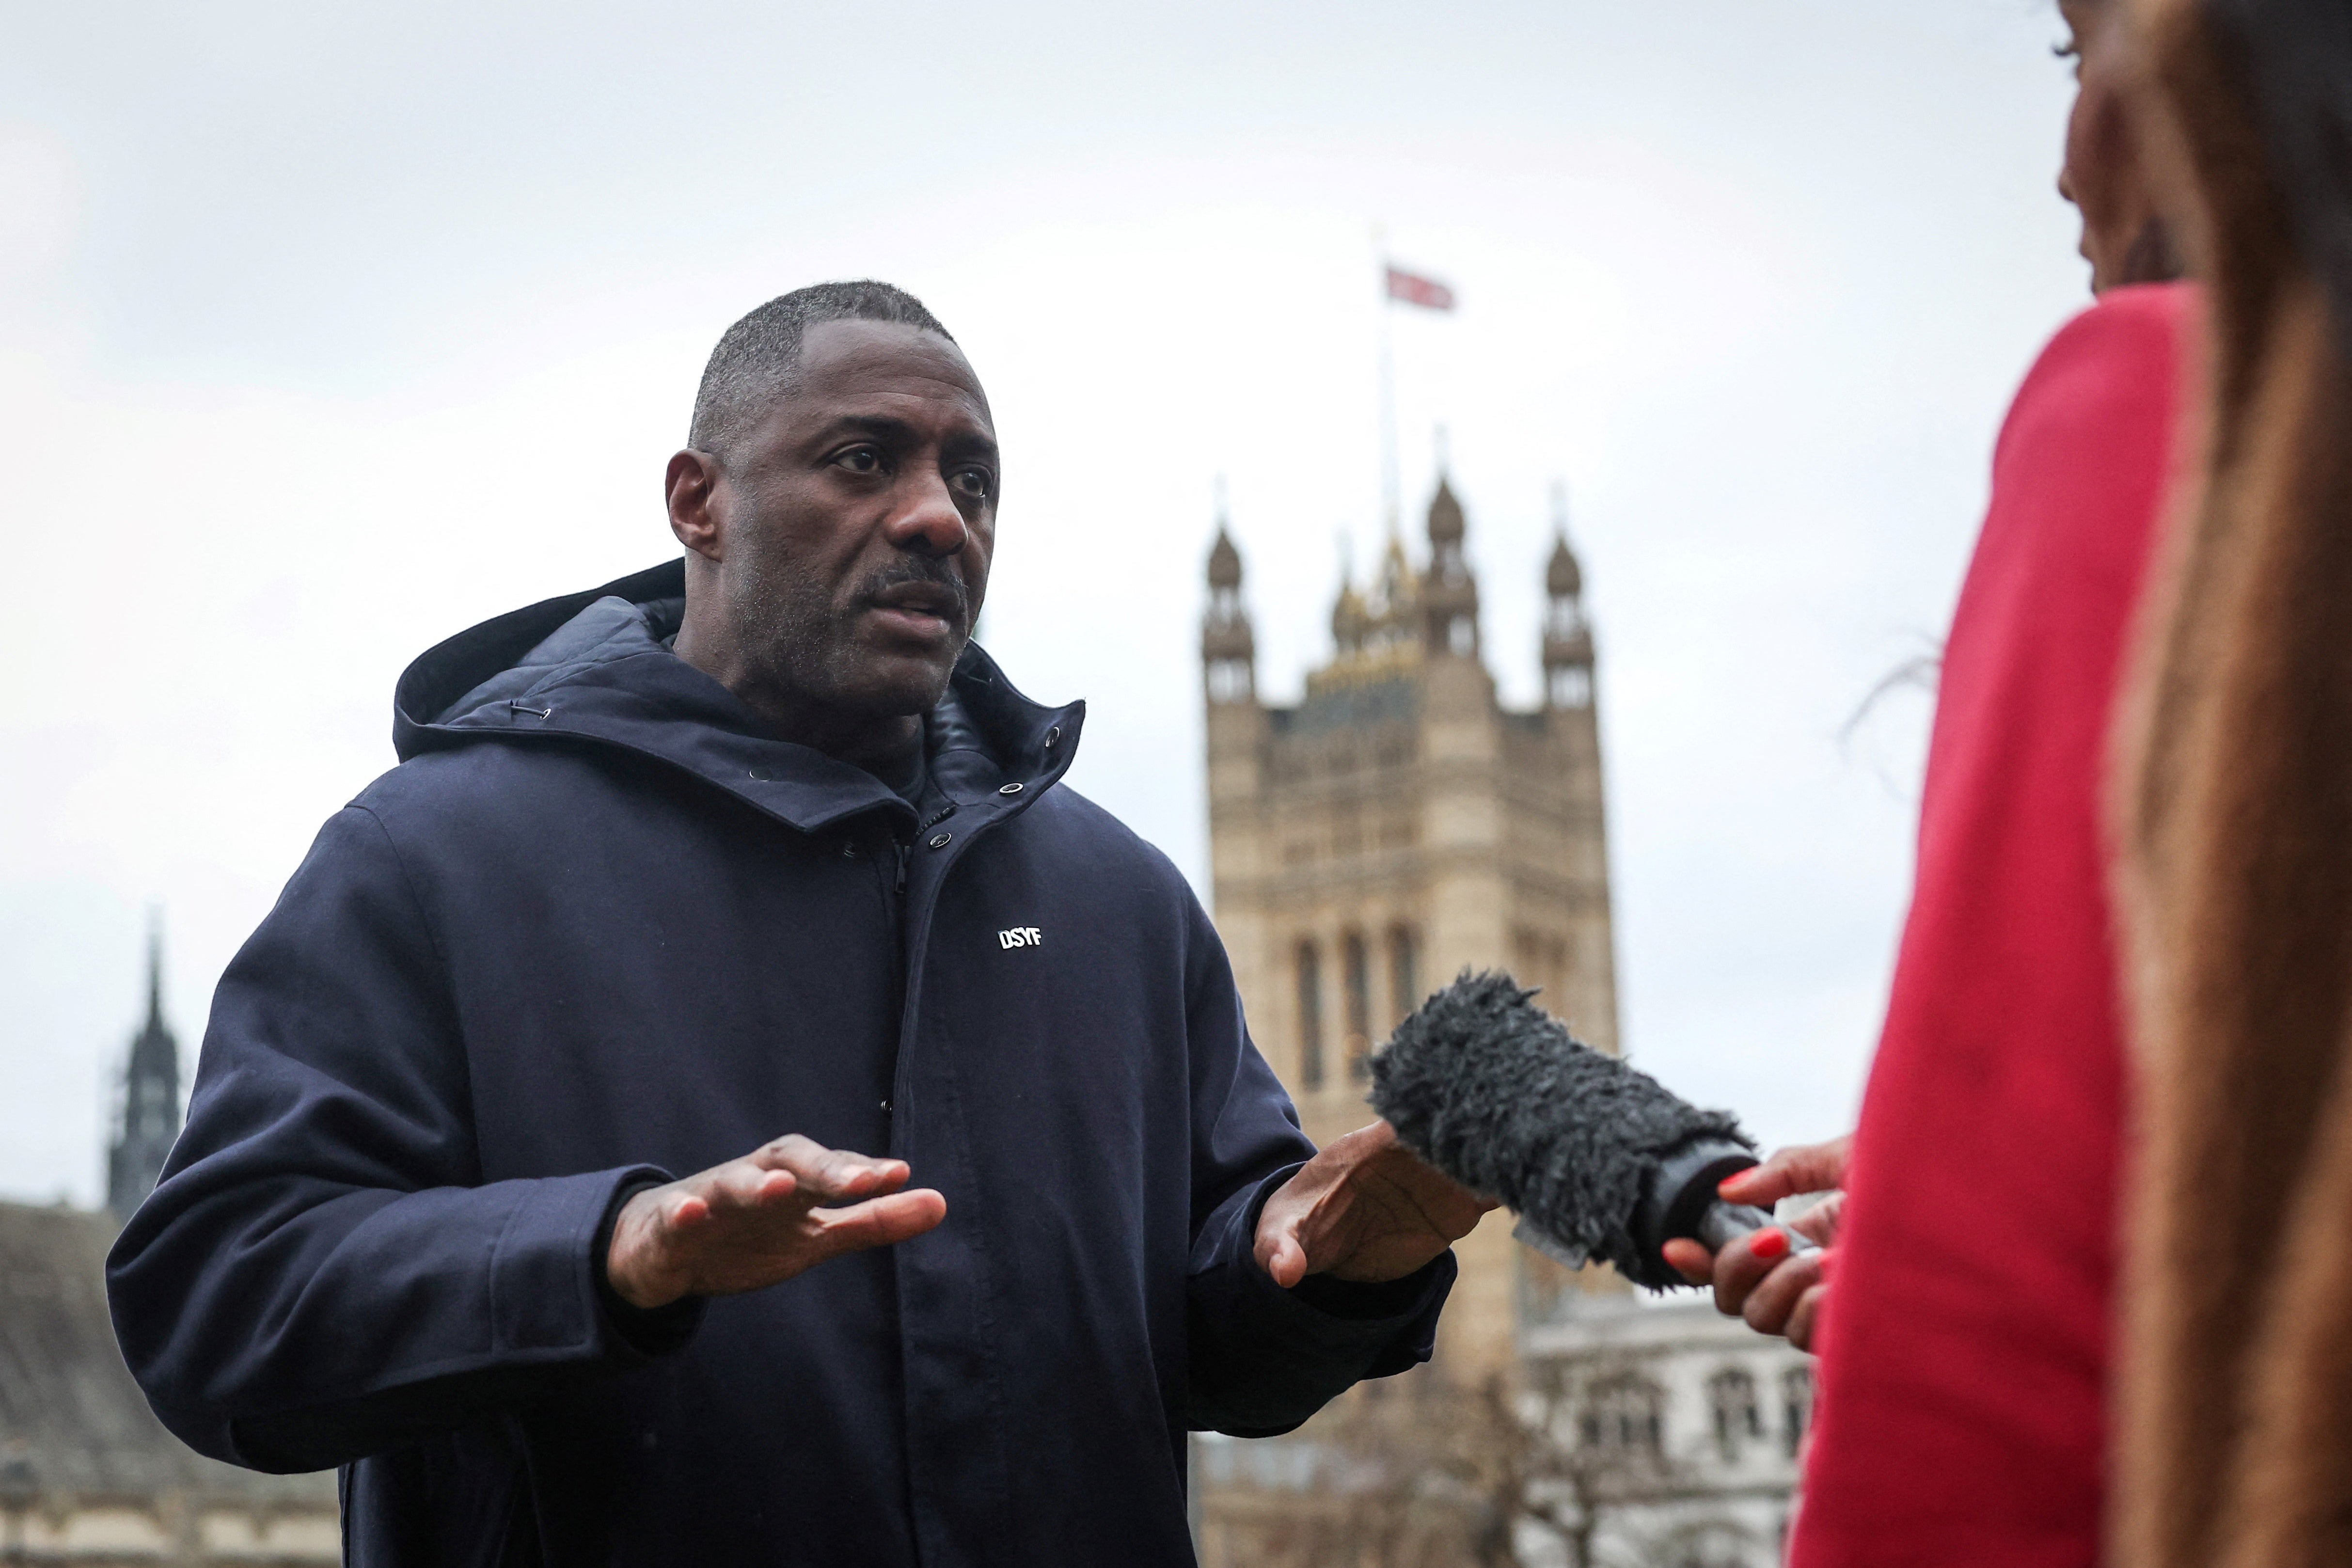 British actor Idris Elba launches a new campaign against knife crime